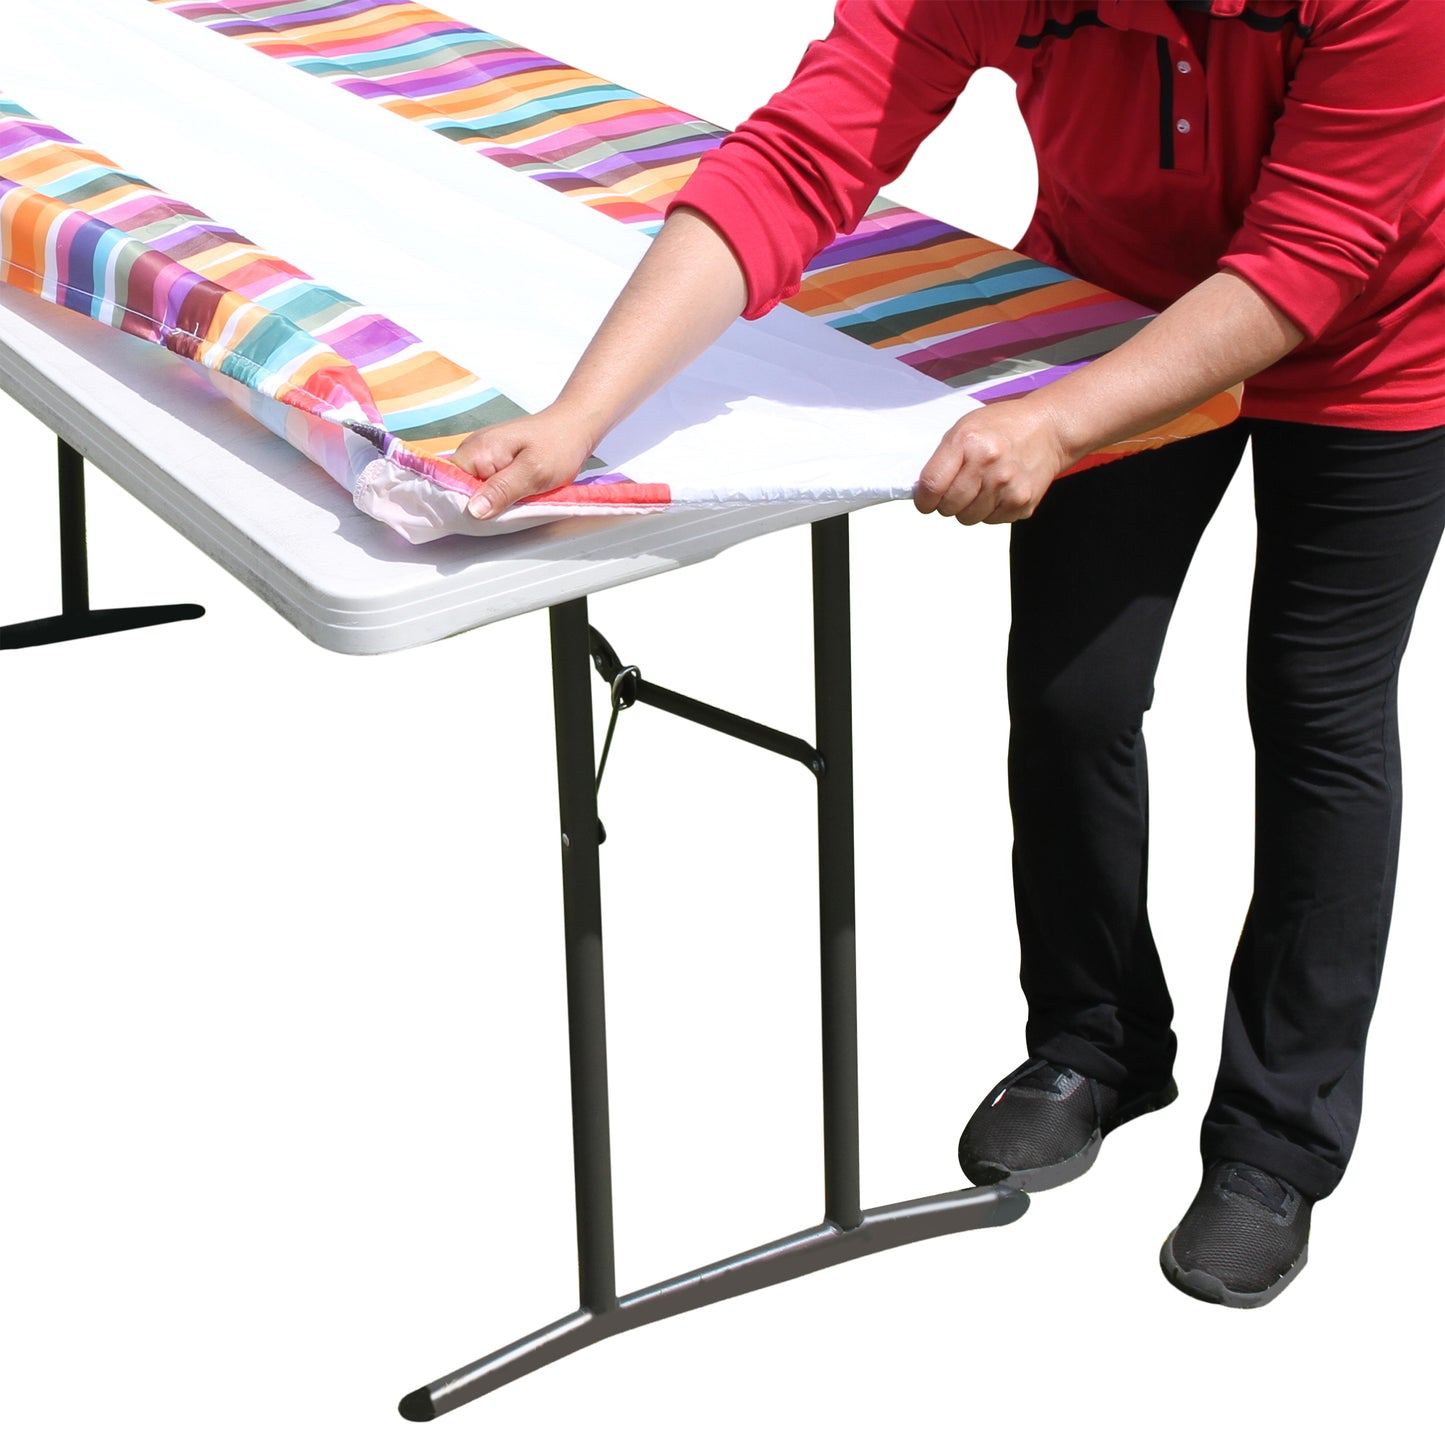 A person stretching TableCloth PLUS 96" Laces Fitted Polyester Tablecloth for 8' Folding Tables over a folding table